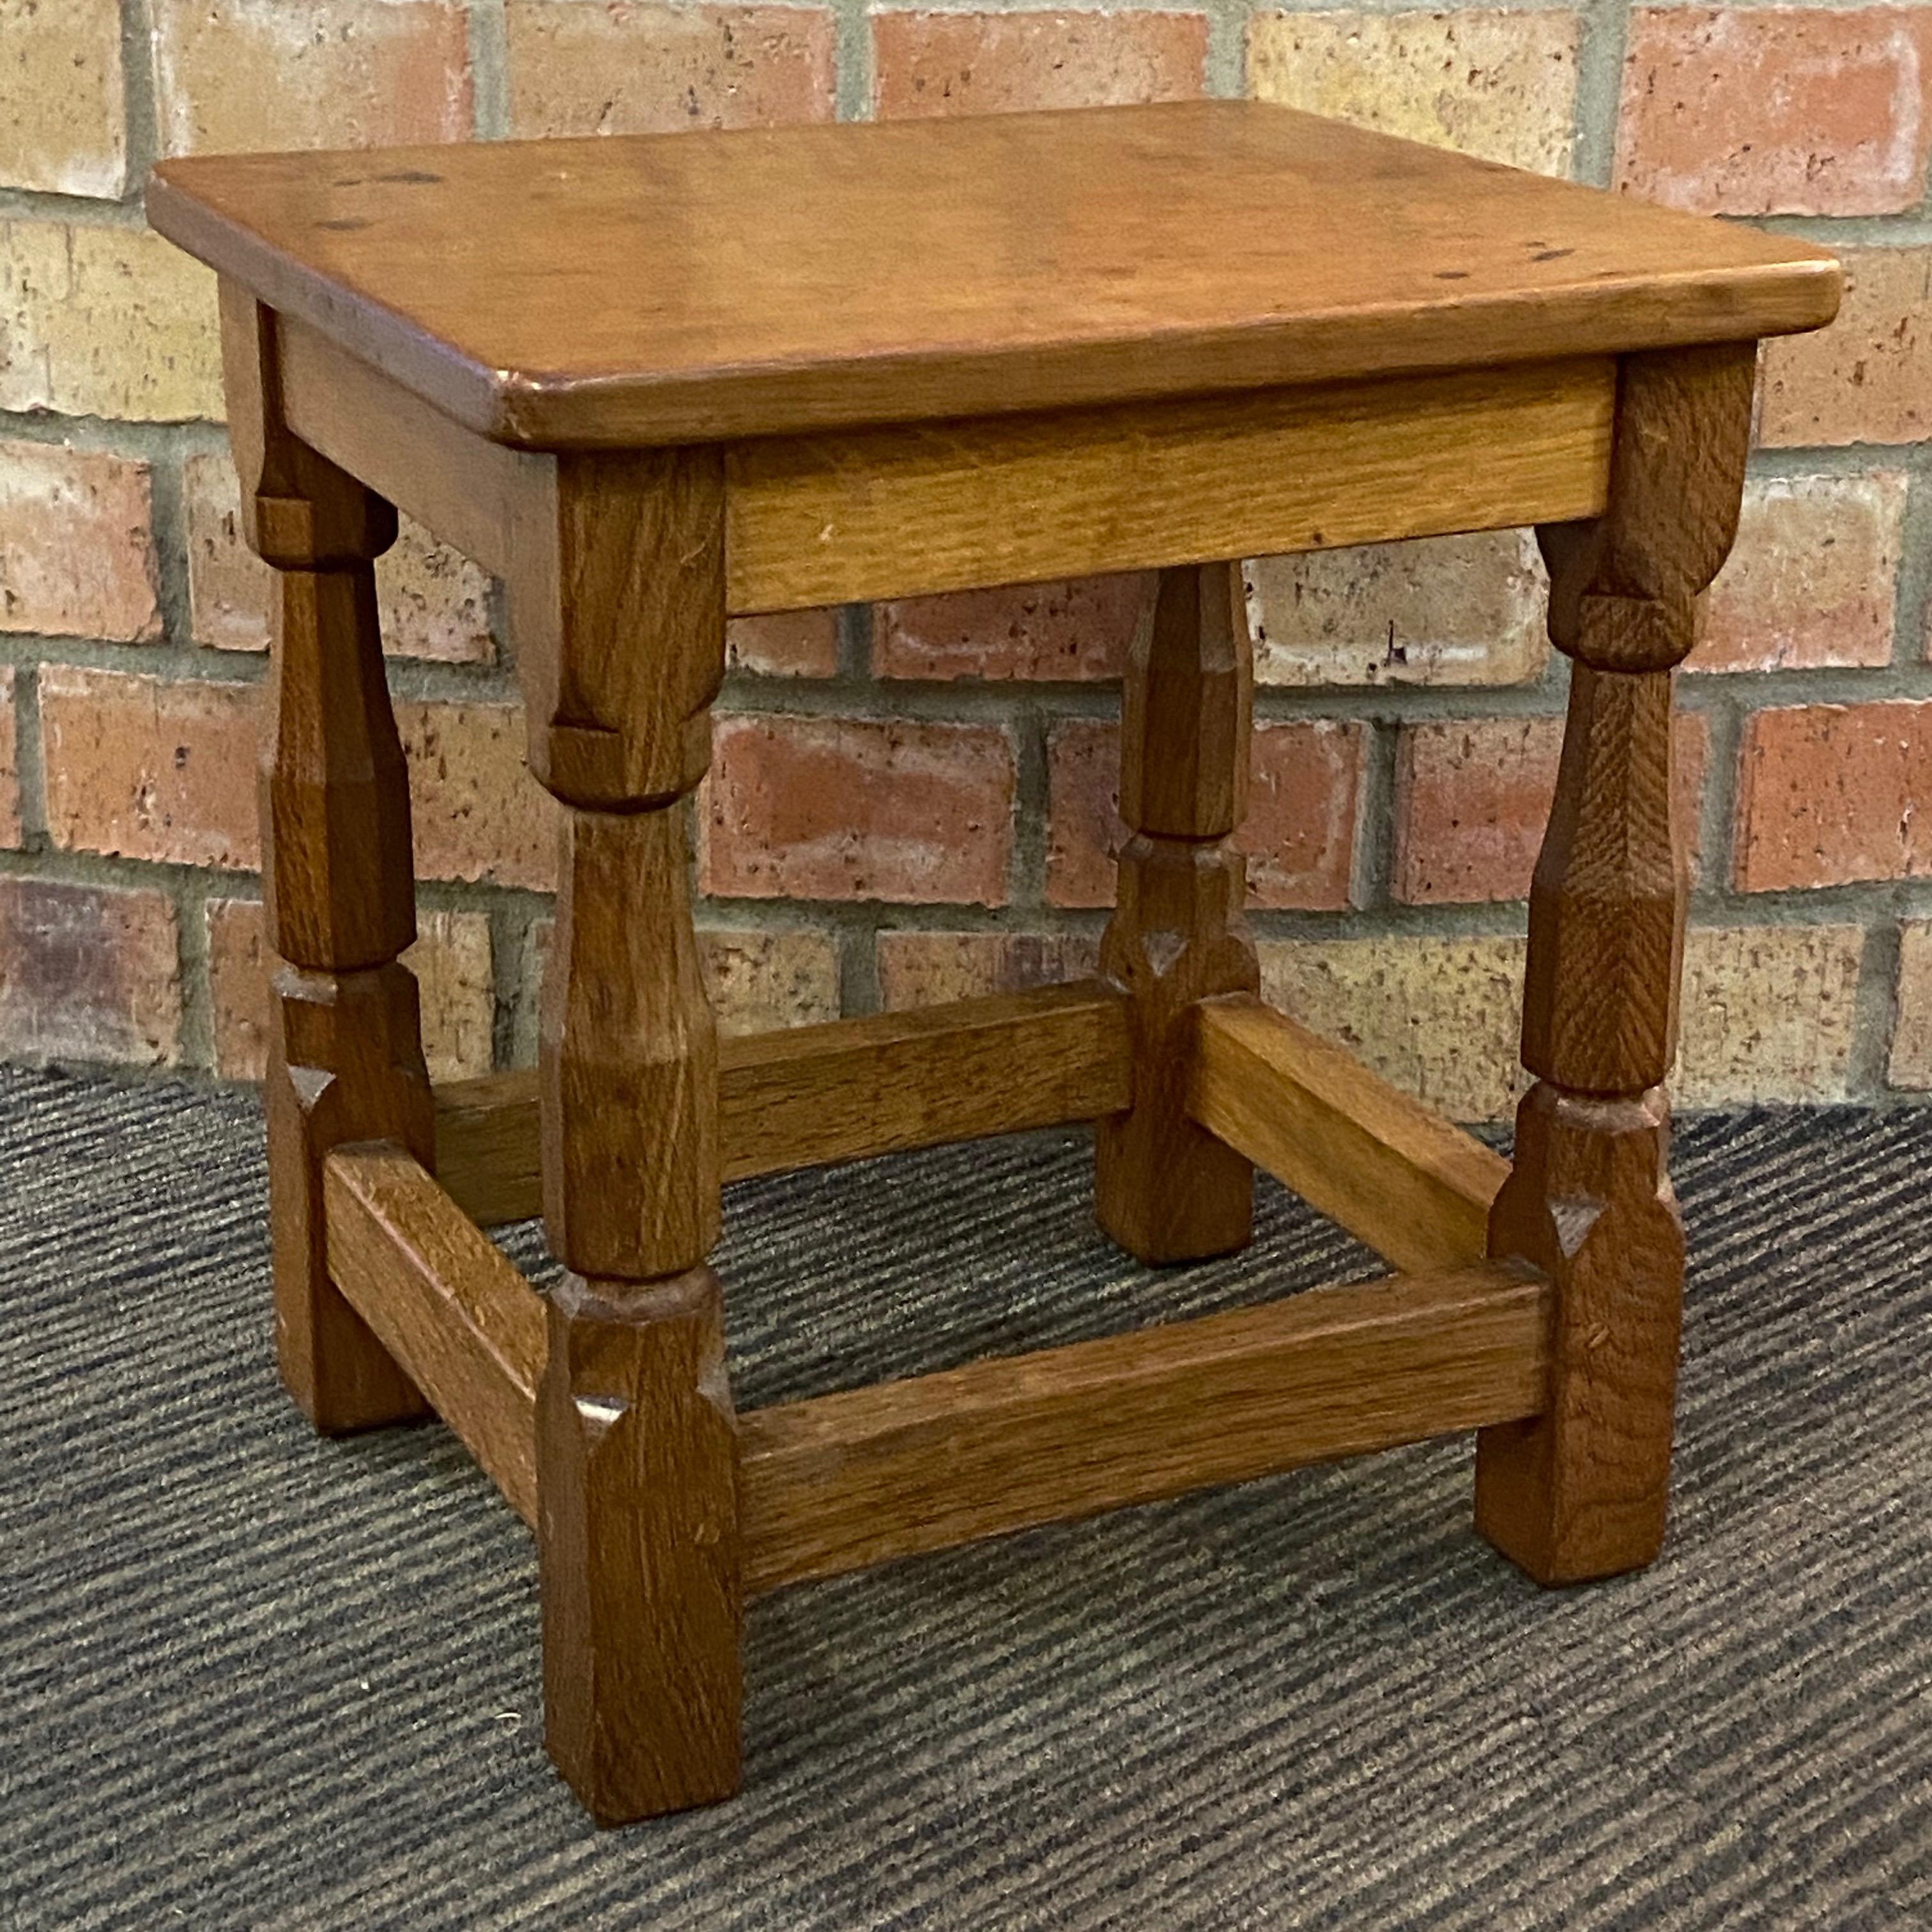 Small Adzed Oak Side Table - Antique Tables - Hemswell Antique Centres